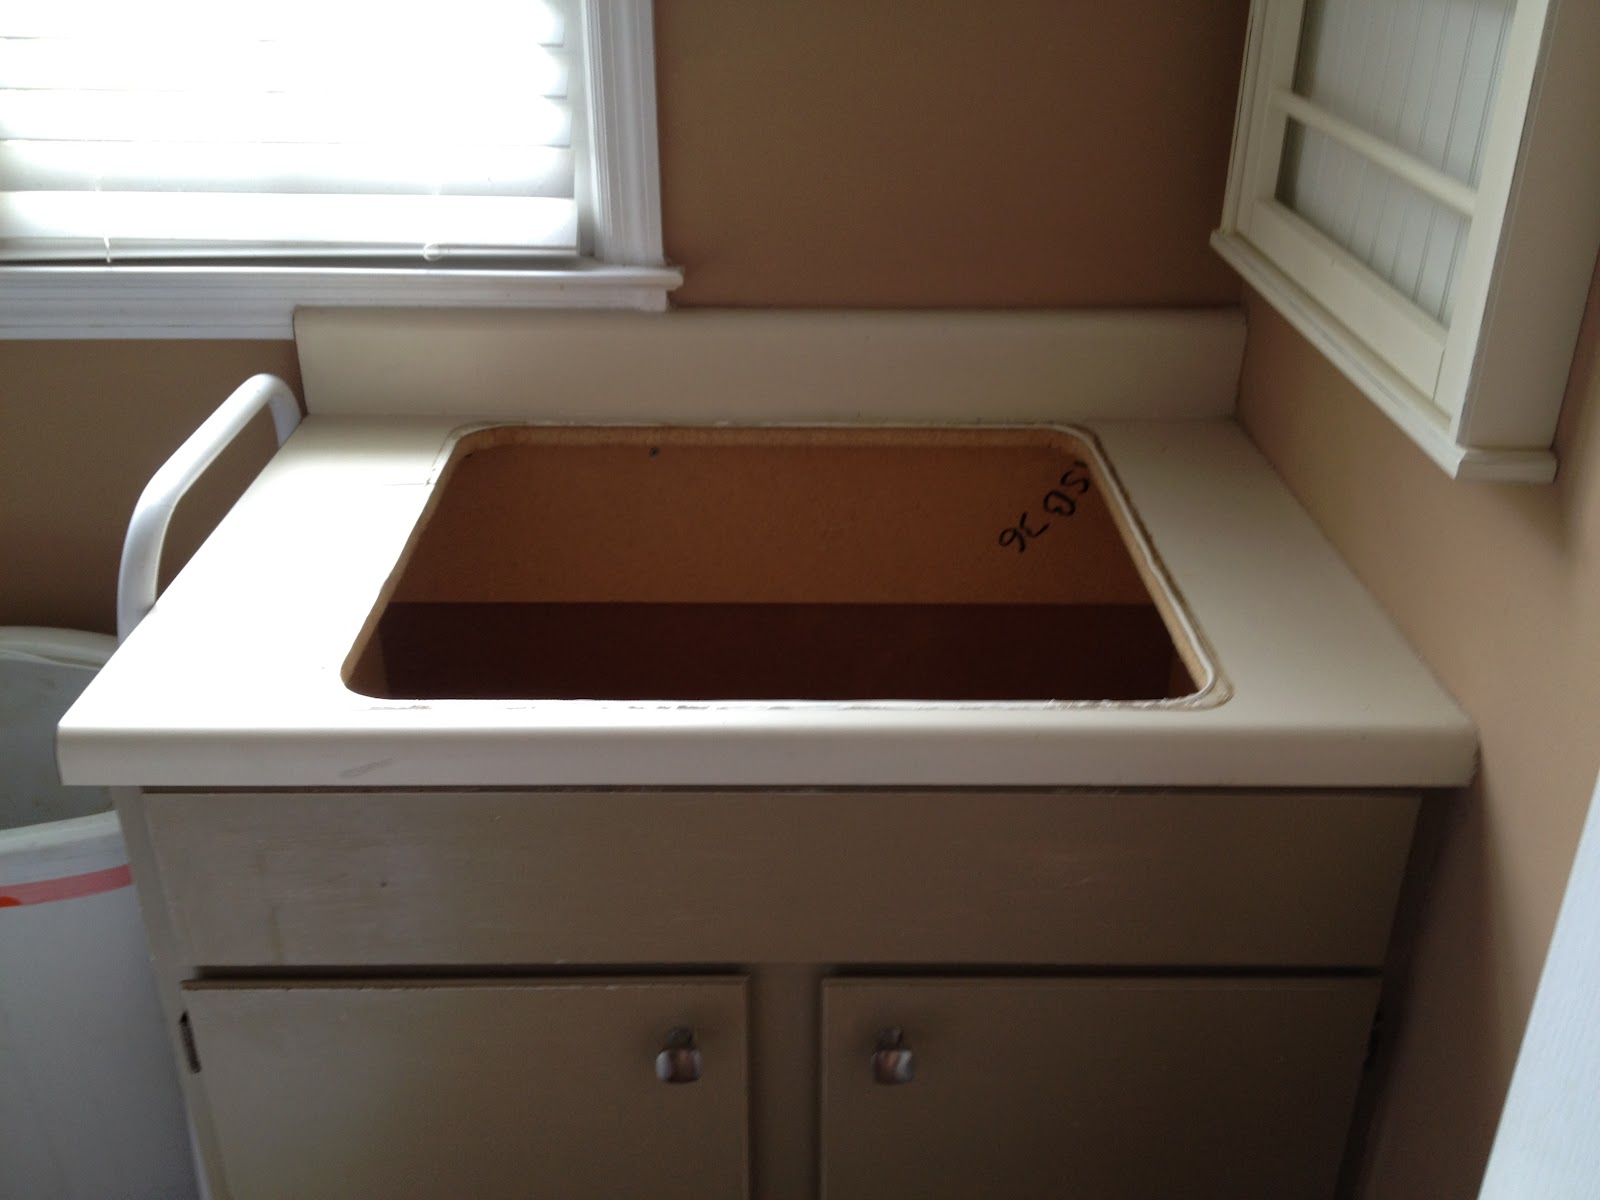 Casalupoli Laundry Room Update The Sink And Countertop